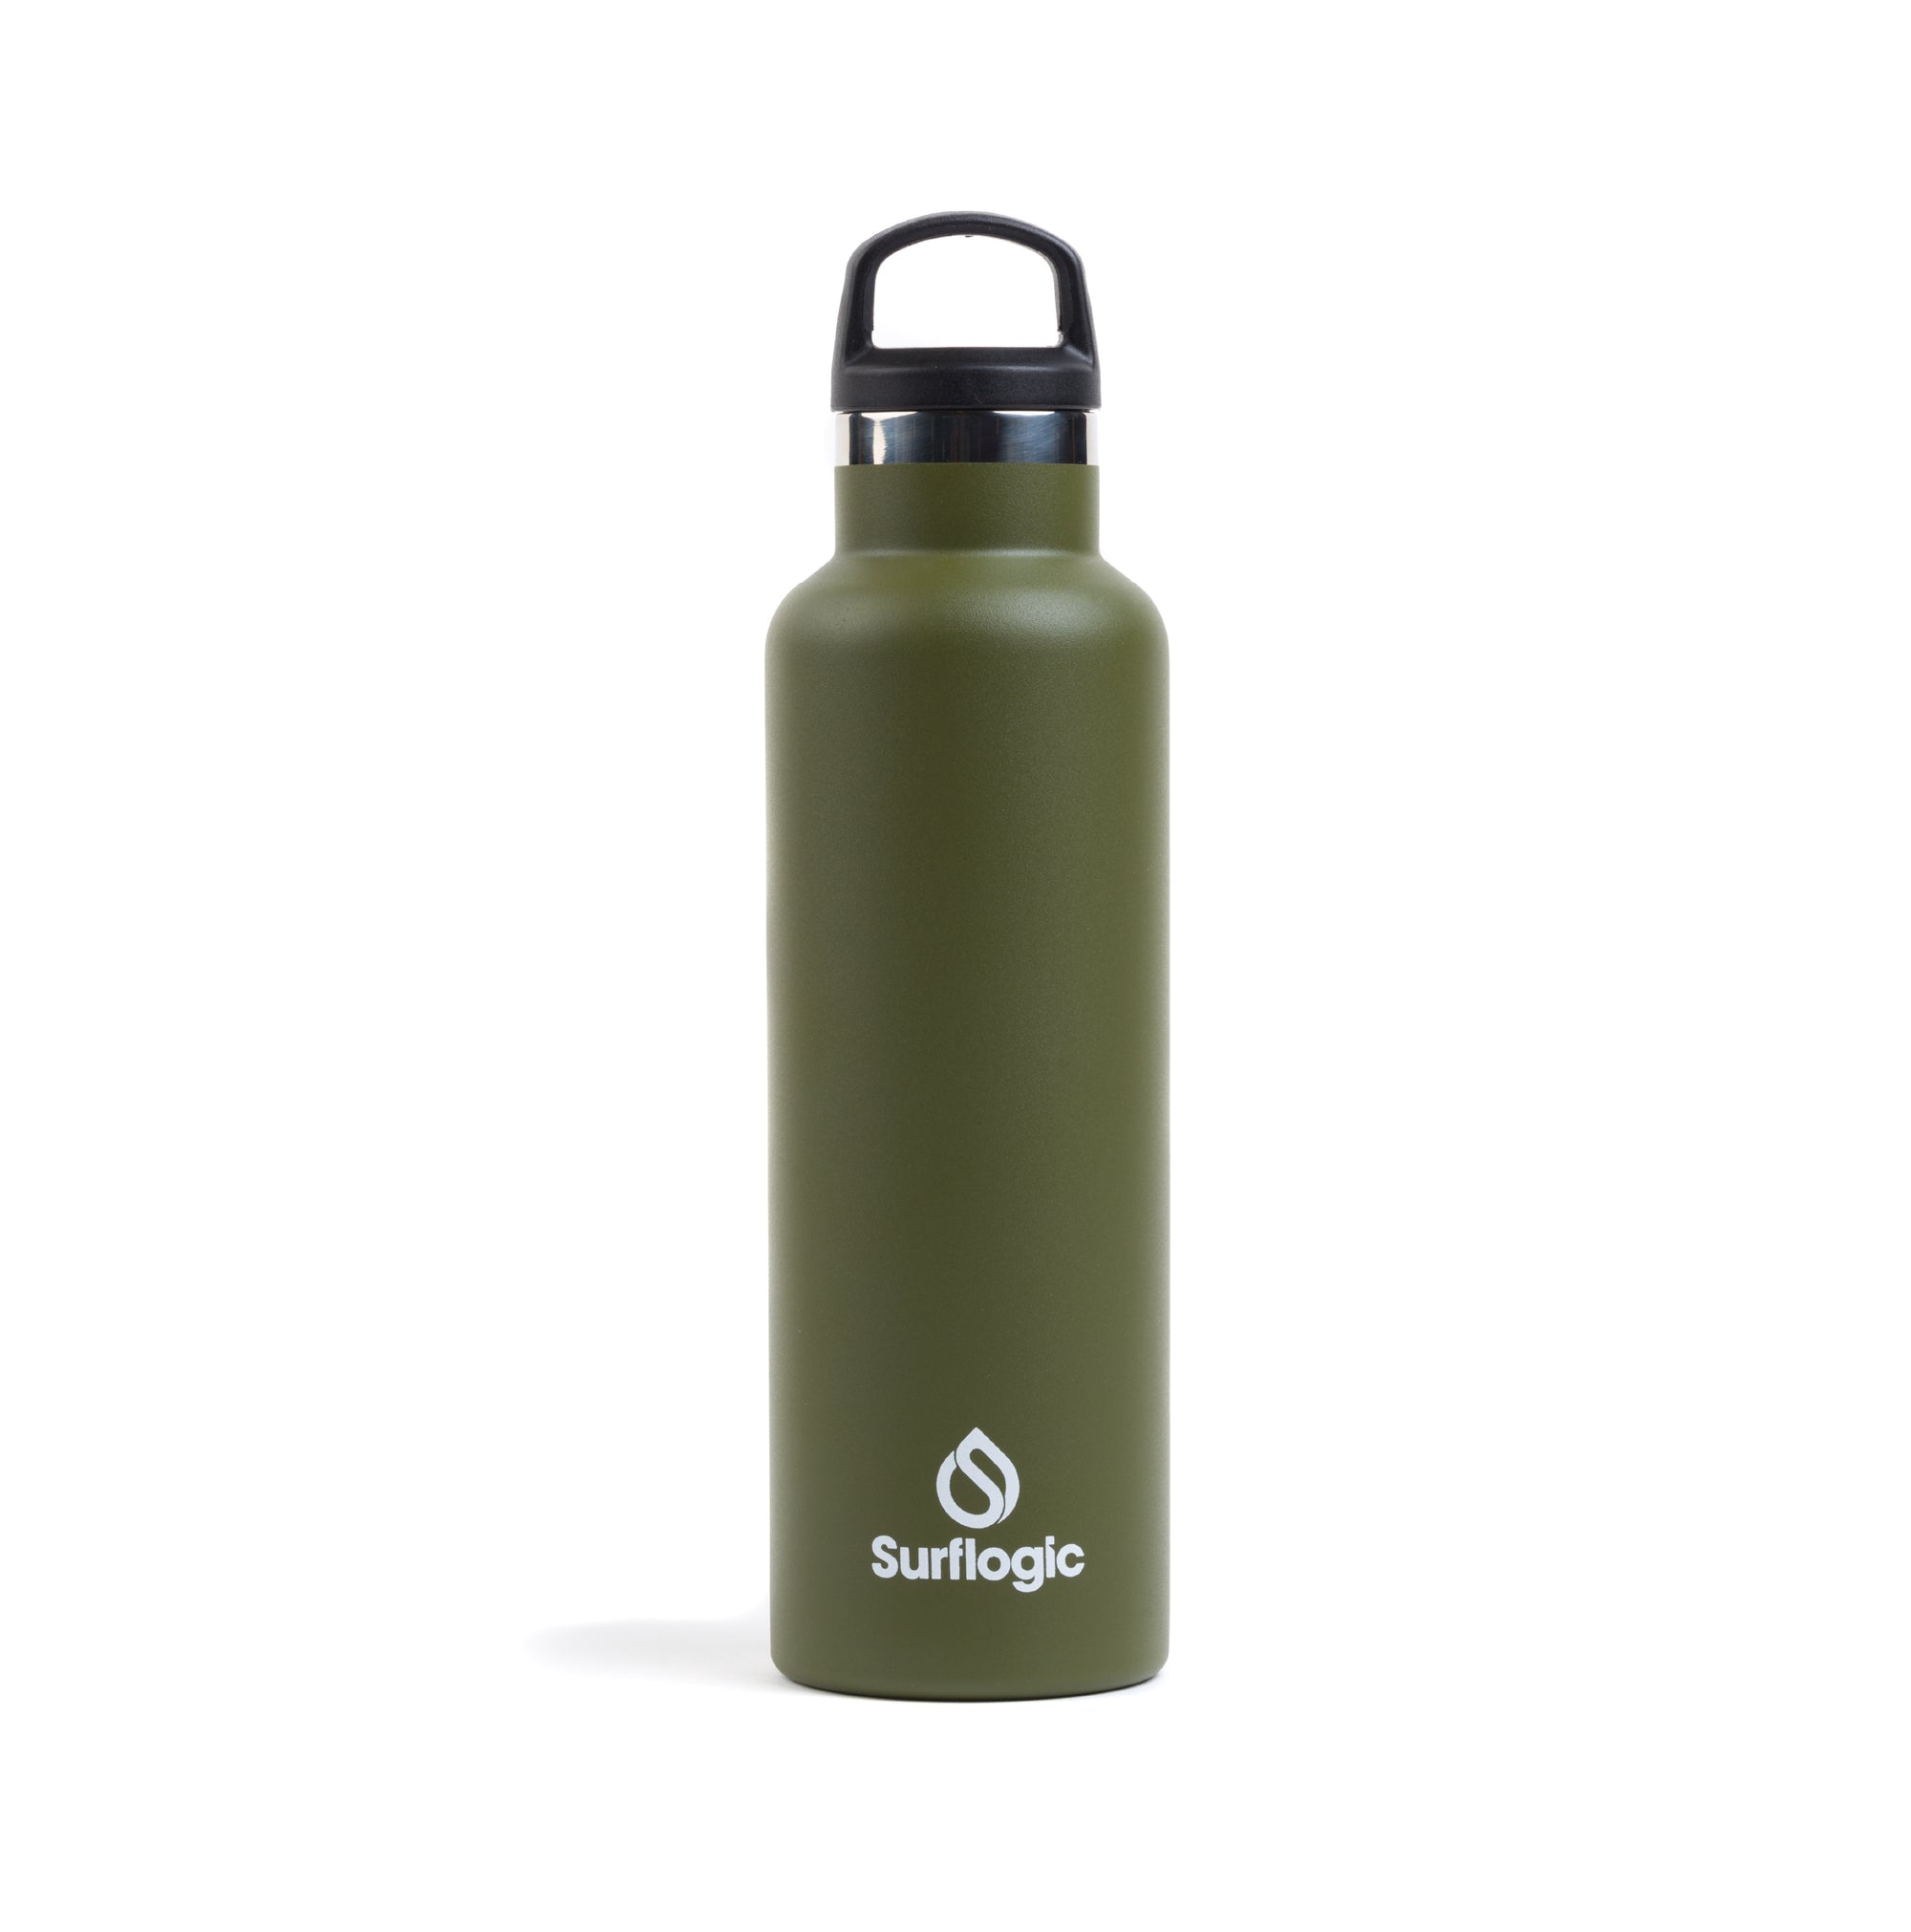 Surflogic Insulated Water Bottle 600 ml Standard Mouth